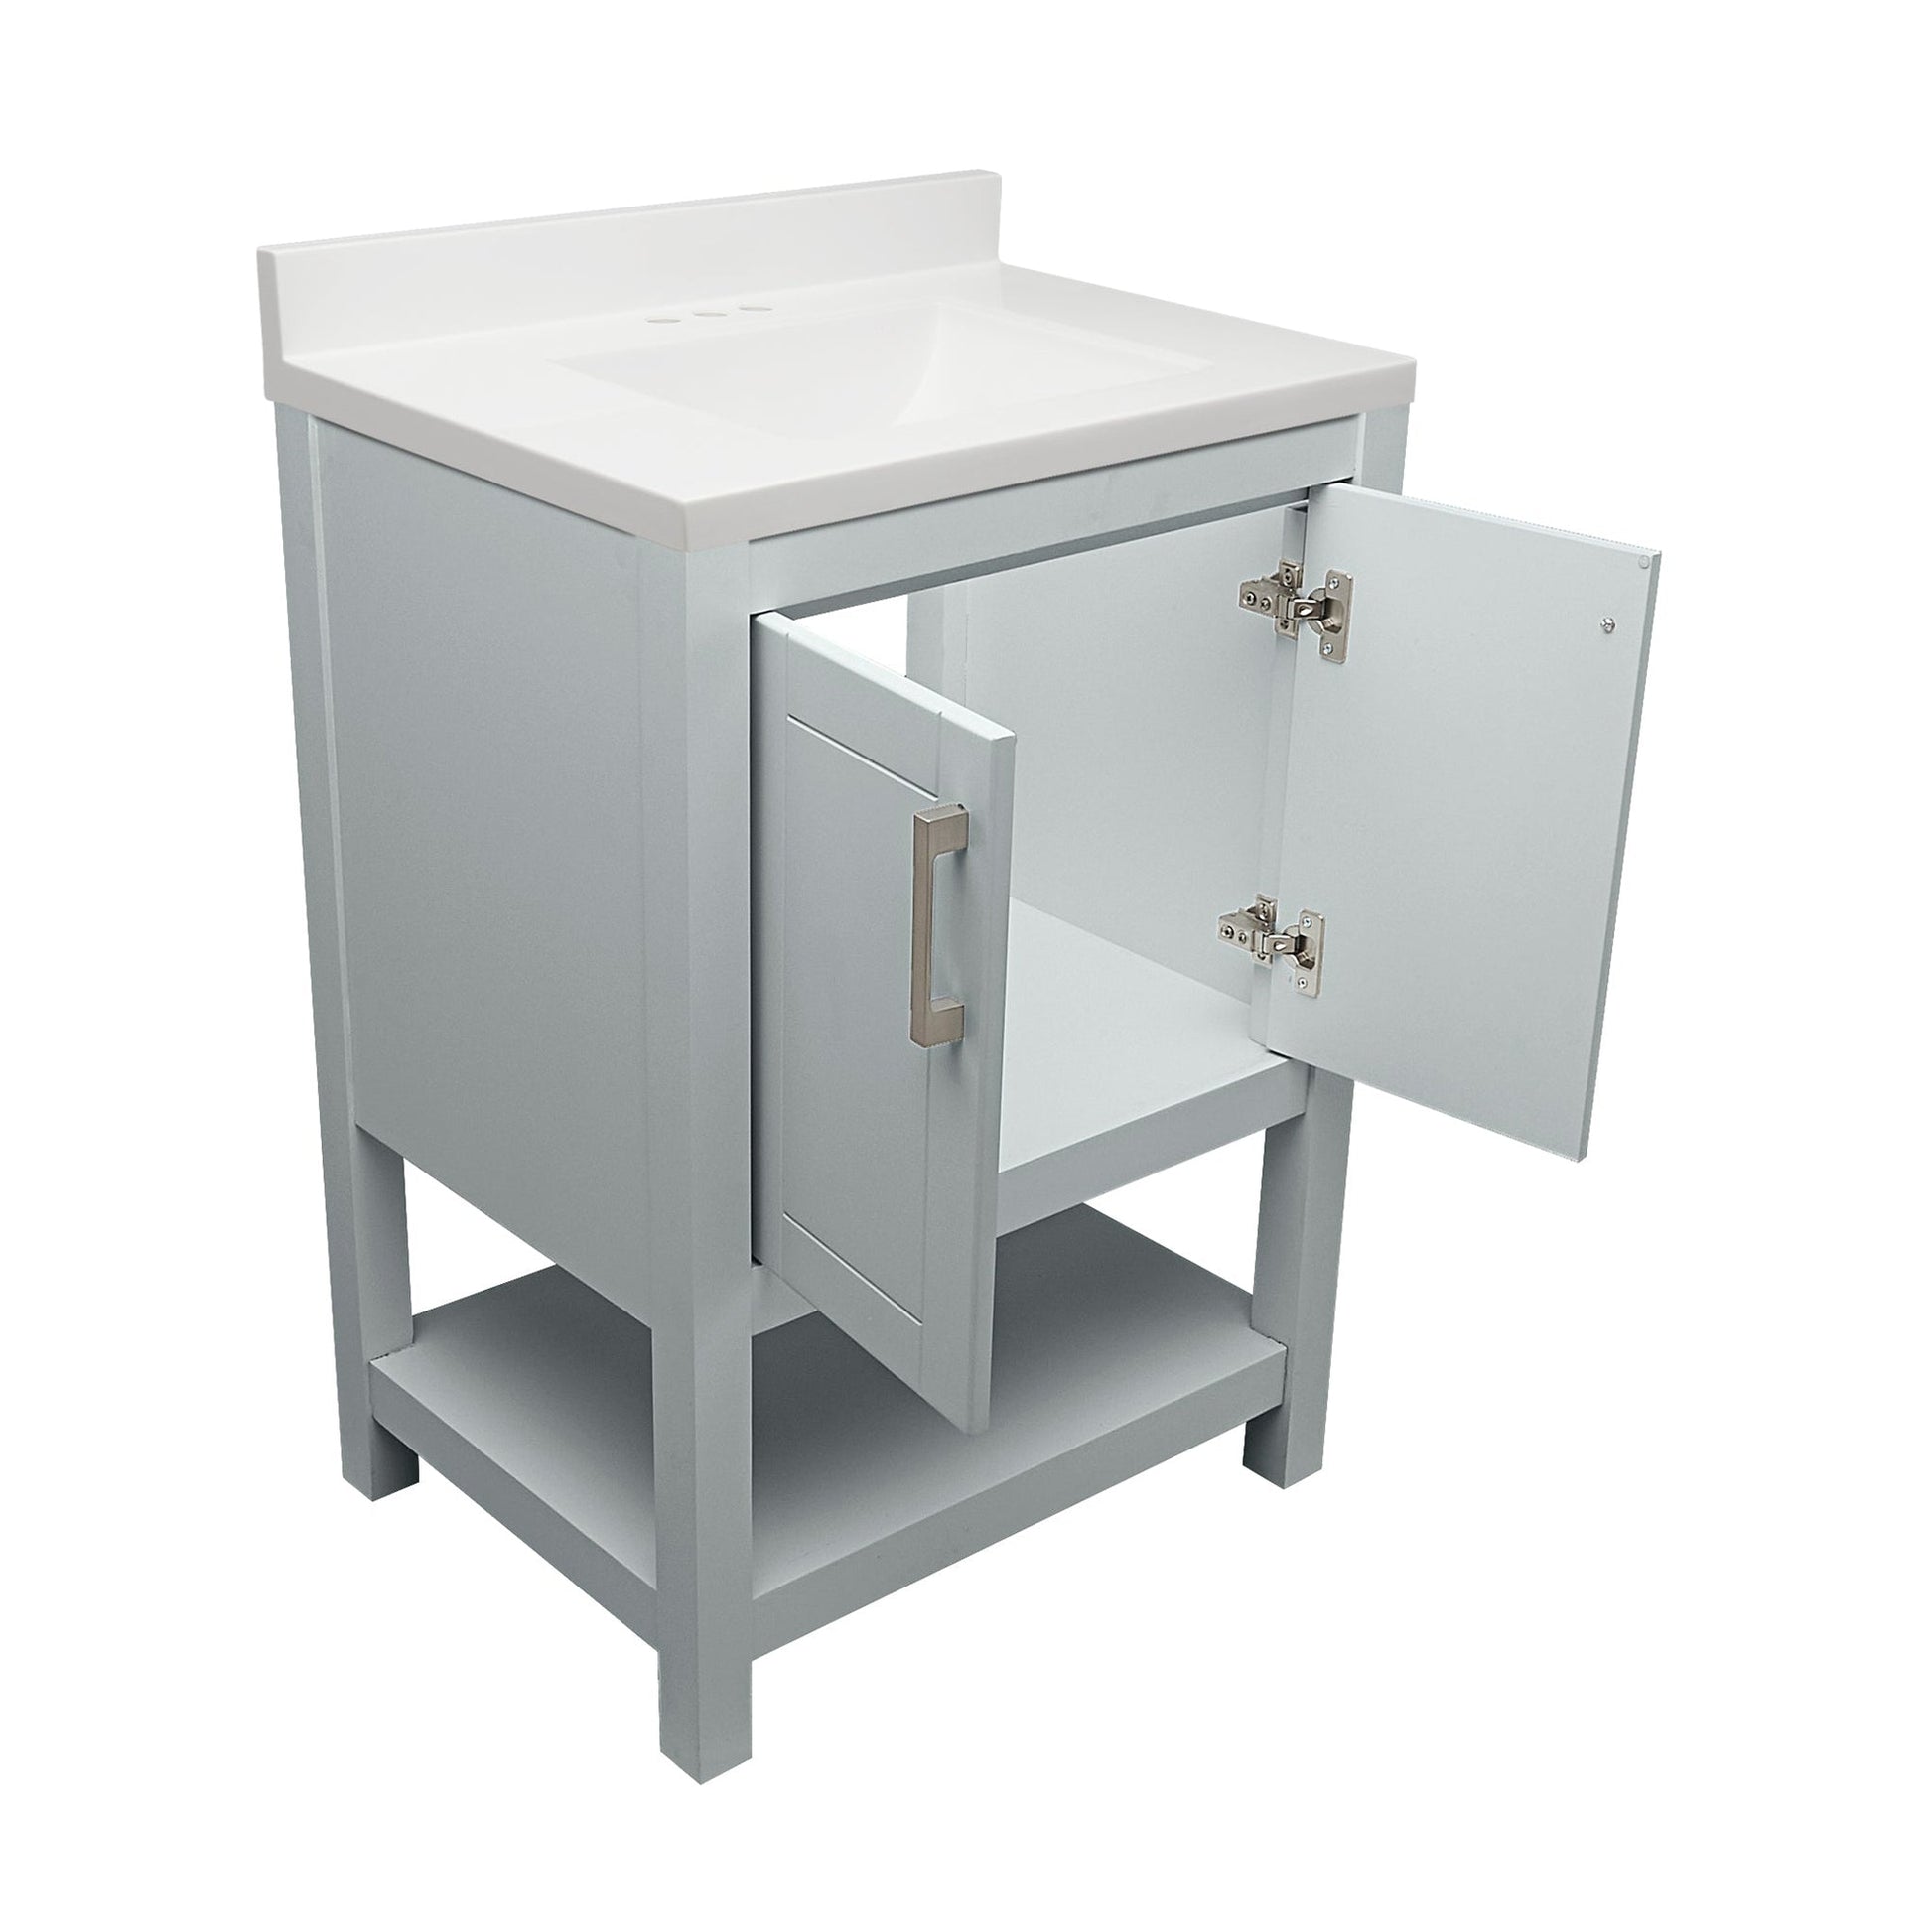 Ella's Bubbles Taos 25" Gray Bathroom Vanity With White Cultured Marble Top With White Backsplash and Sink